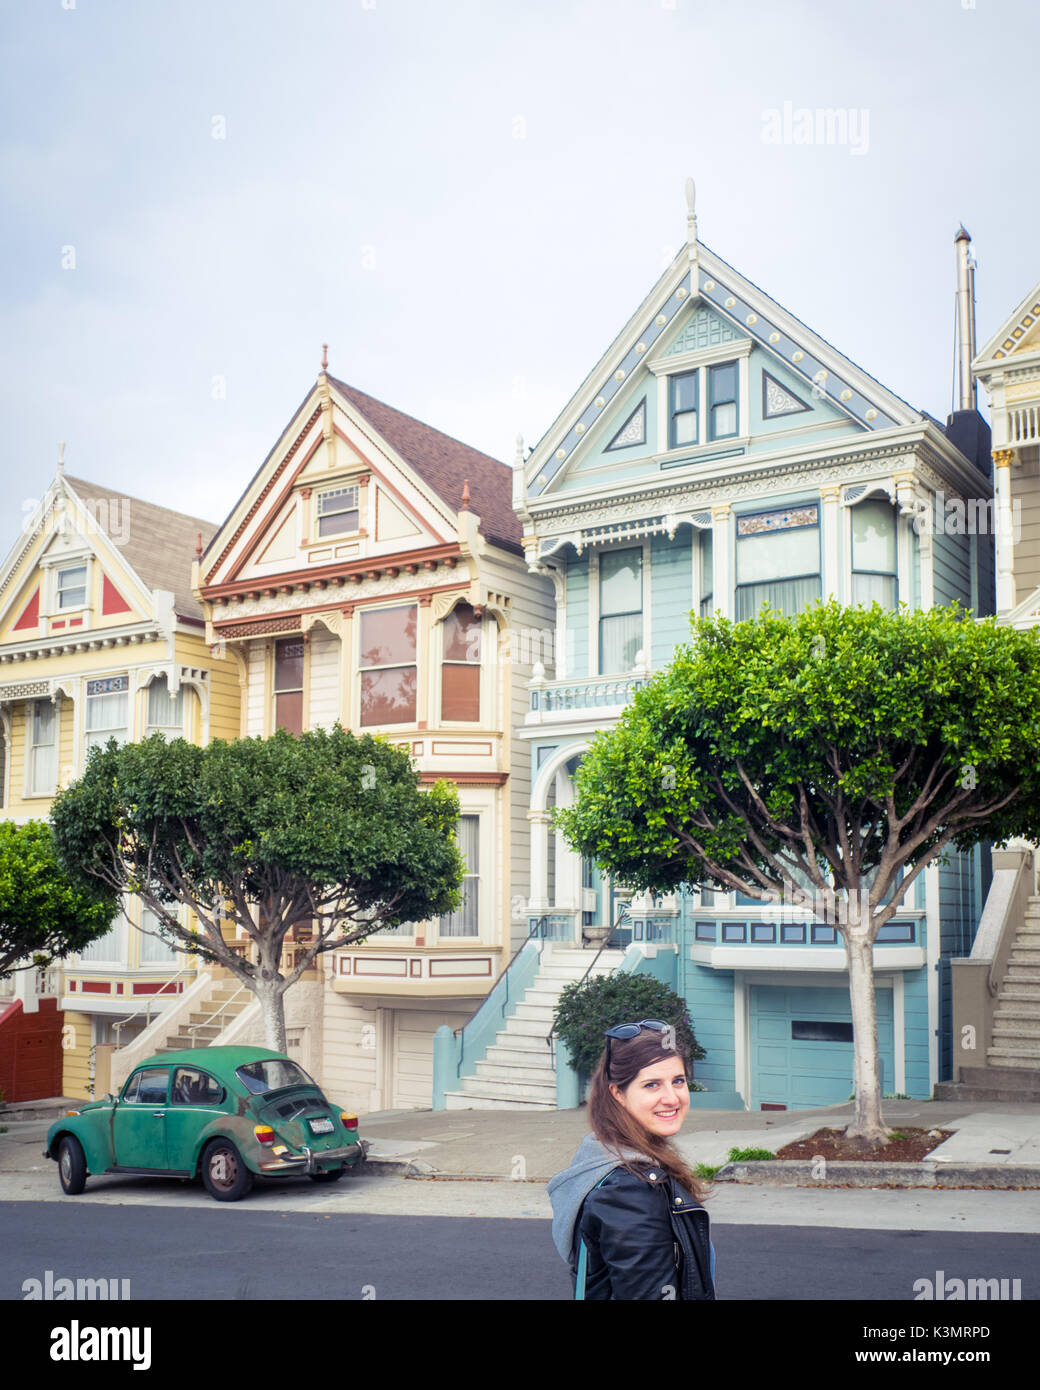 A girl and green Volkswagen Beetle in front of the 'Painted Ladies' row of Victorian Houses on Steiner Street (at Alamo Square) in San Francisco. Stock Photo